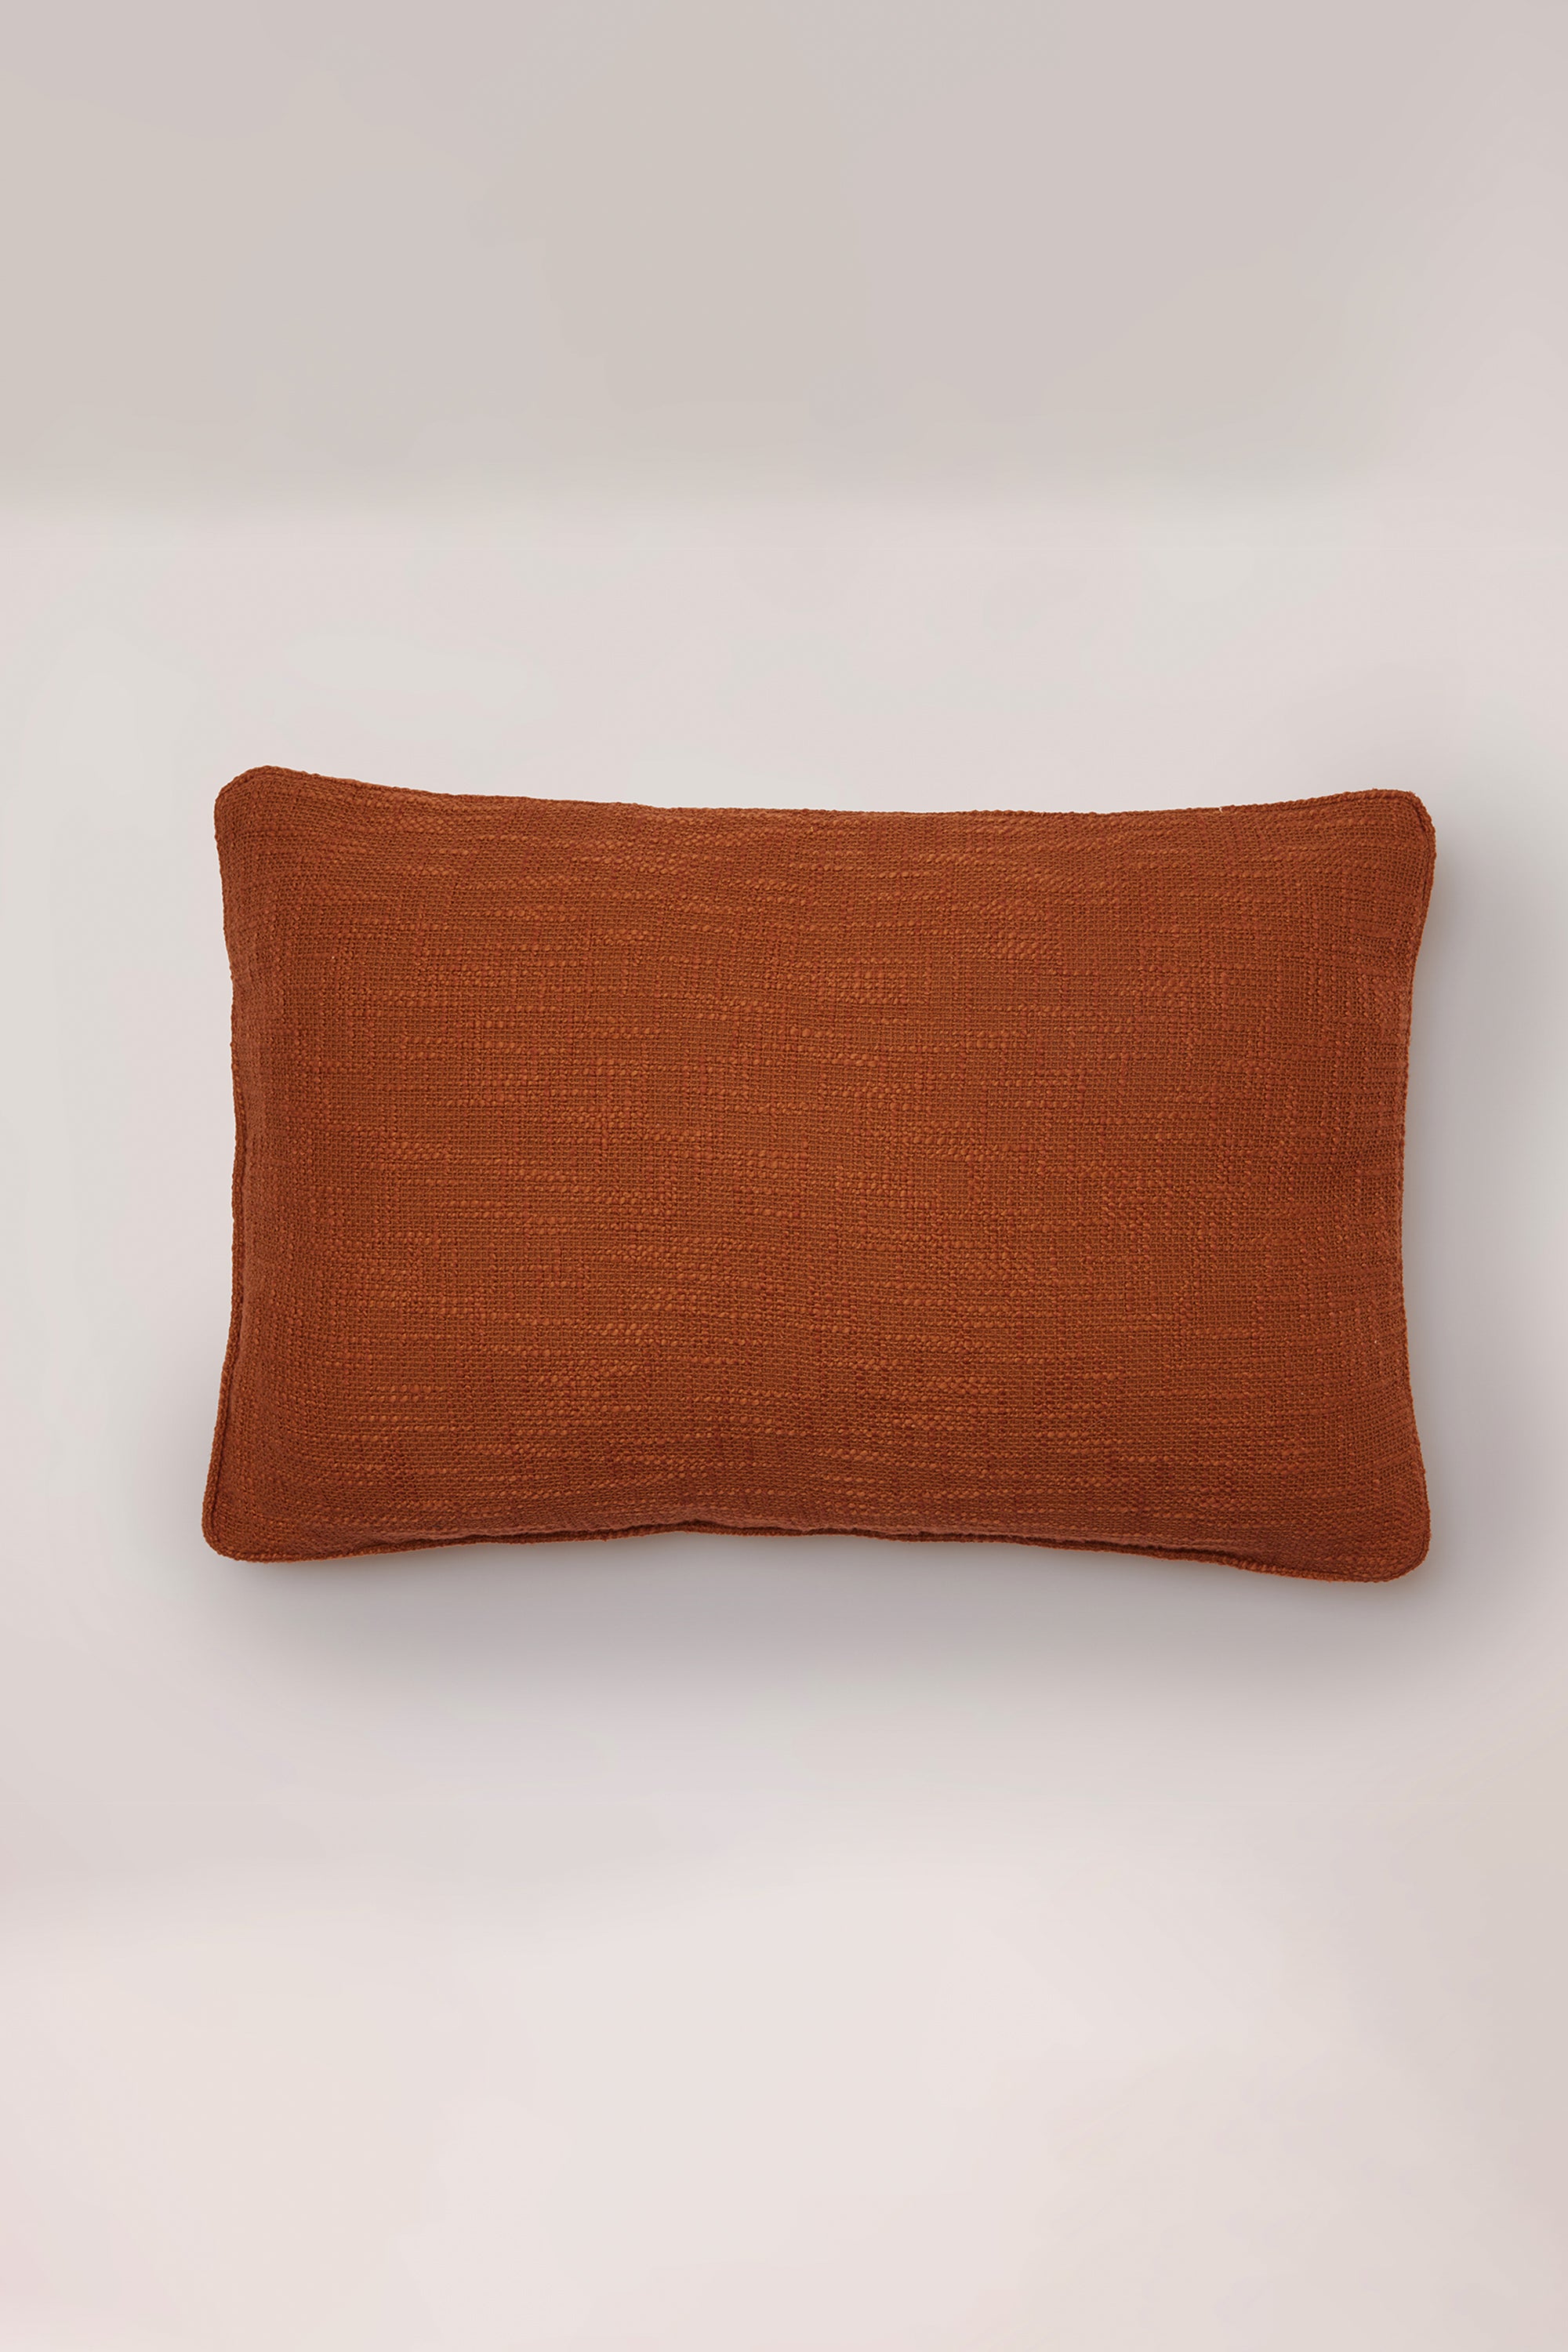 Terracotta Throw Pillow Cover with Piping - Fleck